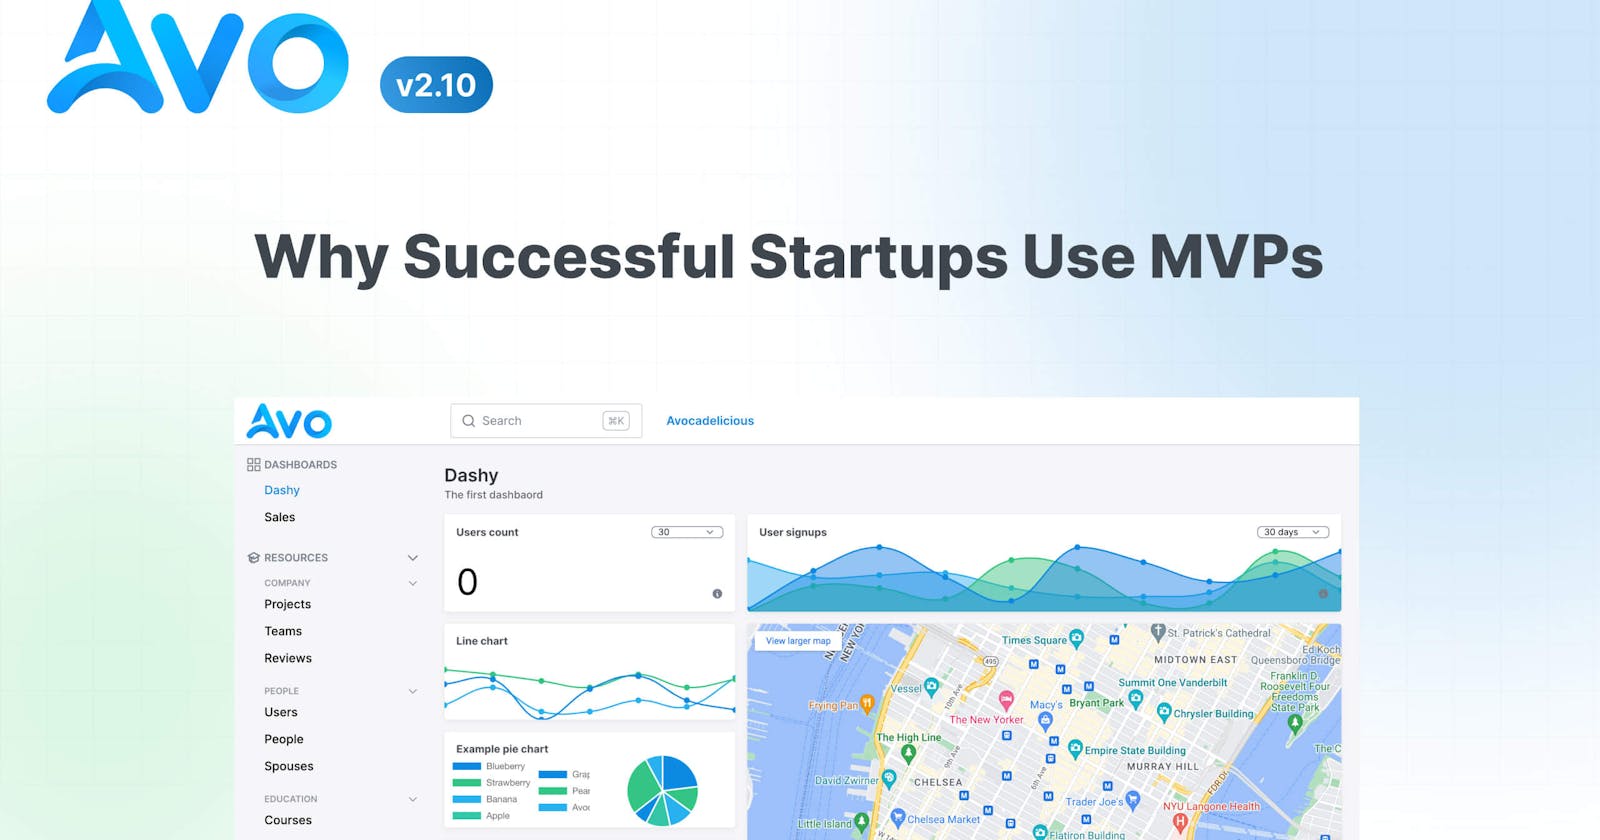 Why Successful Startups Use MVPs